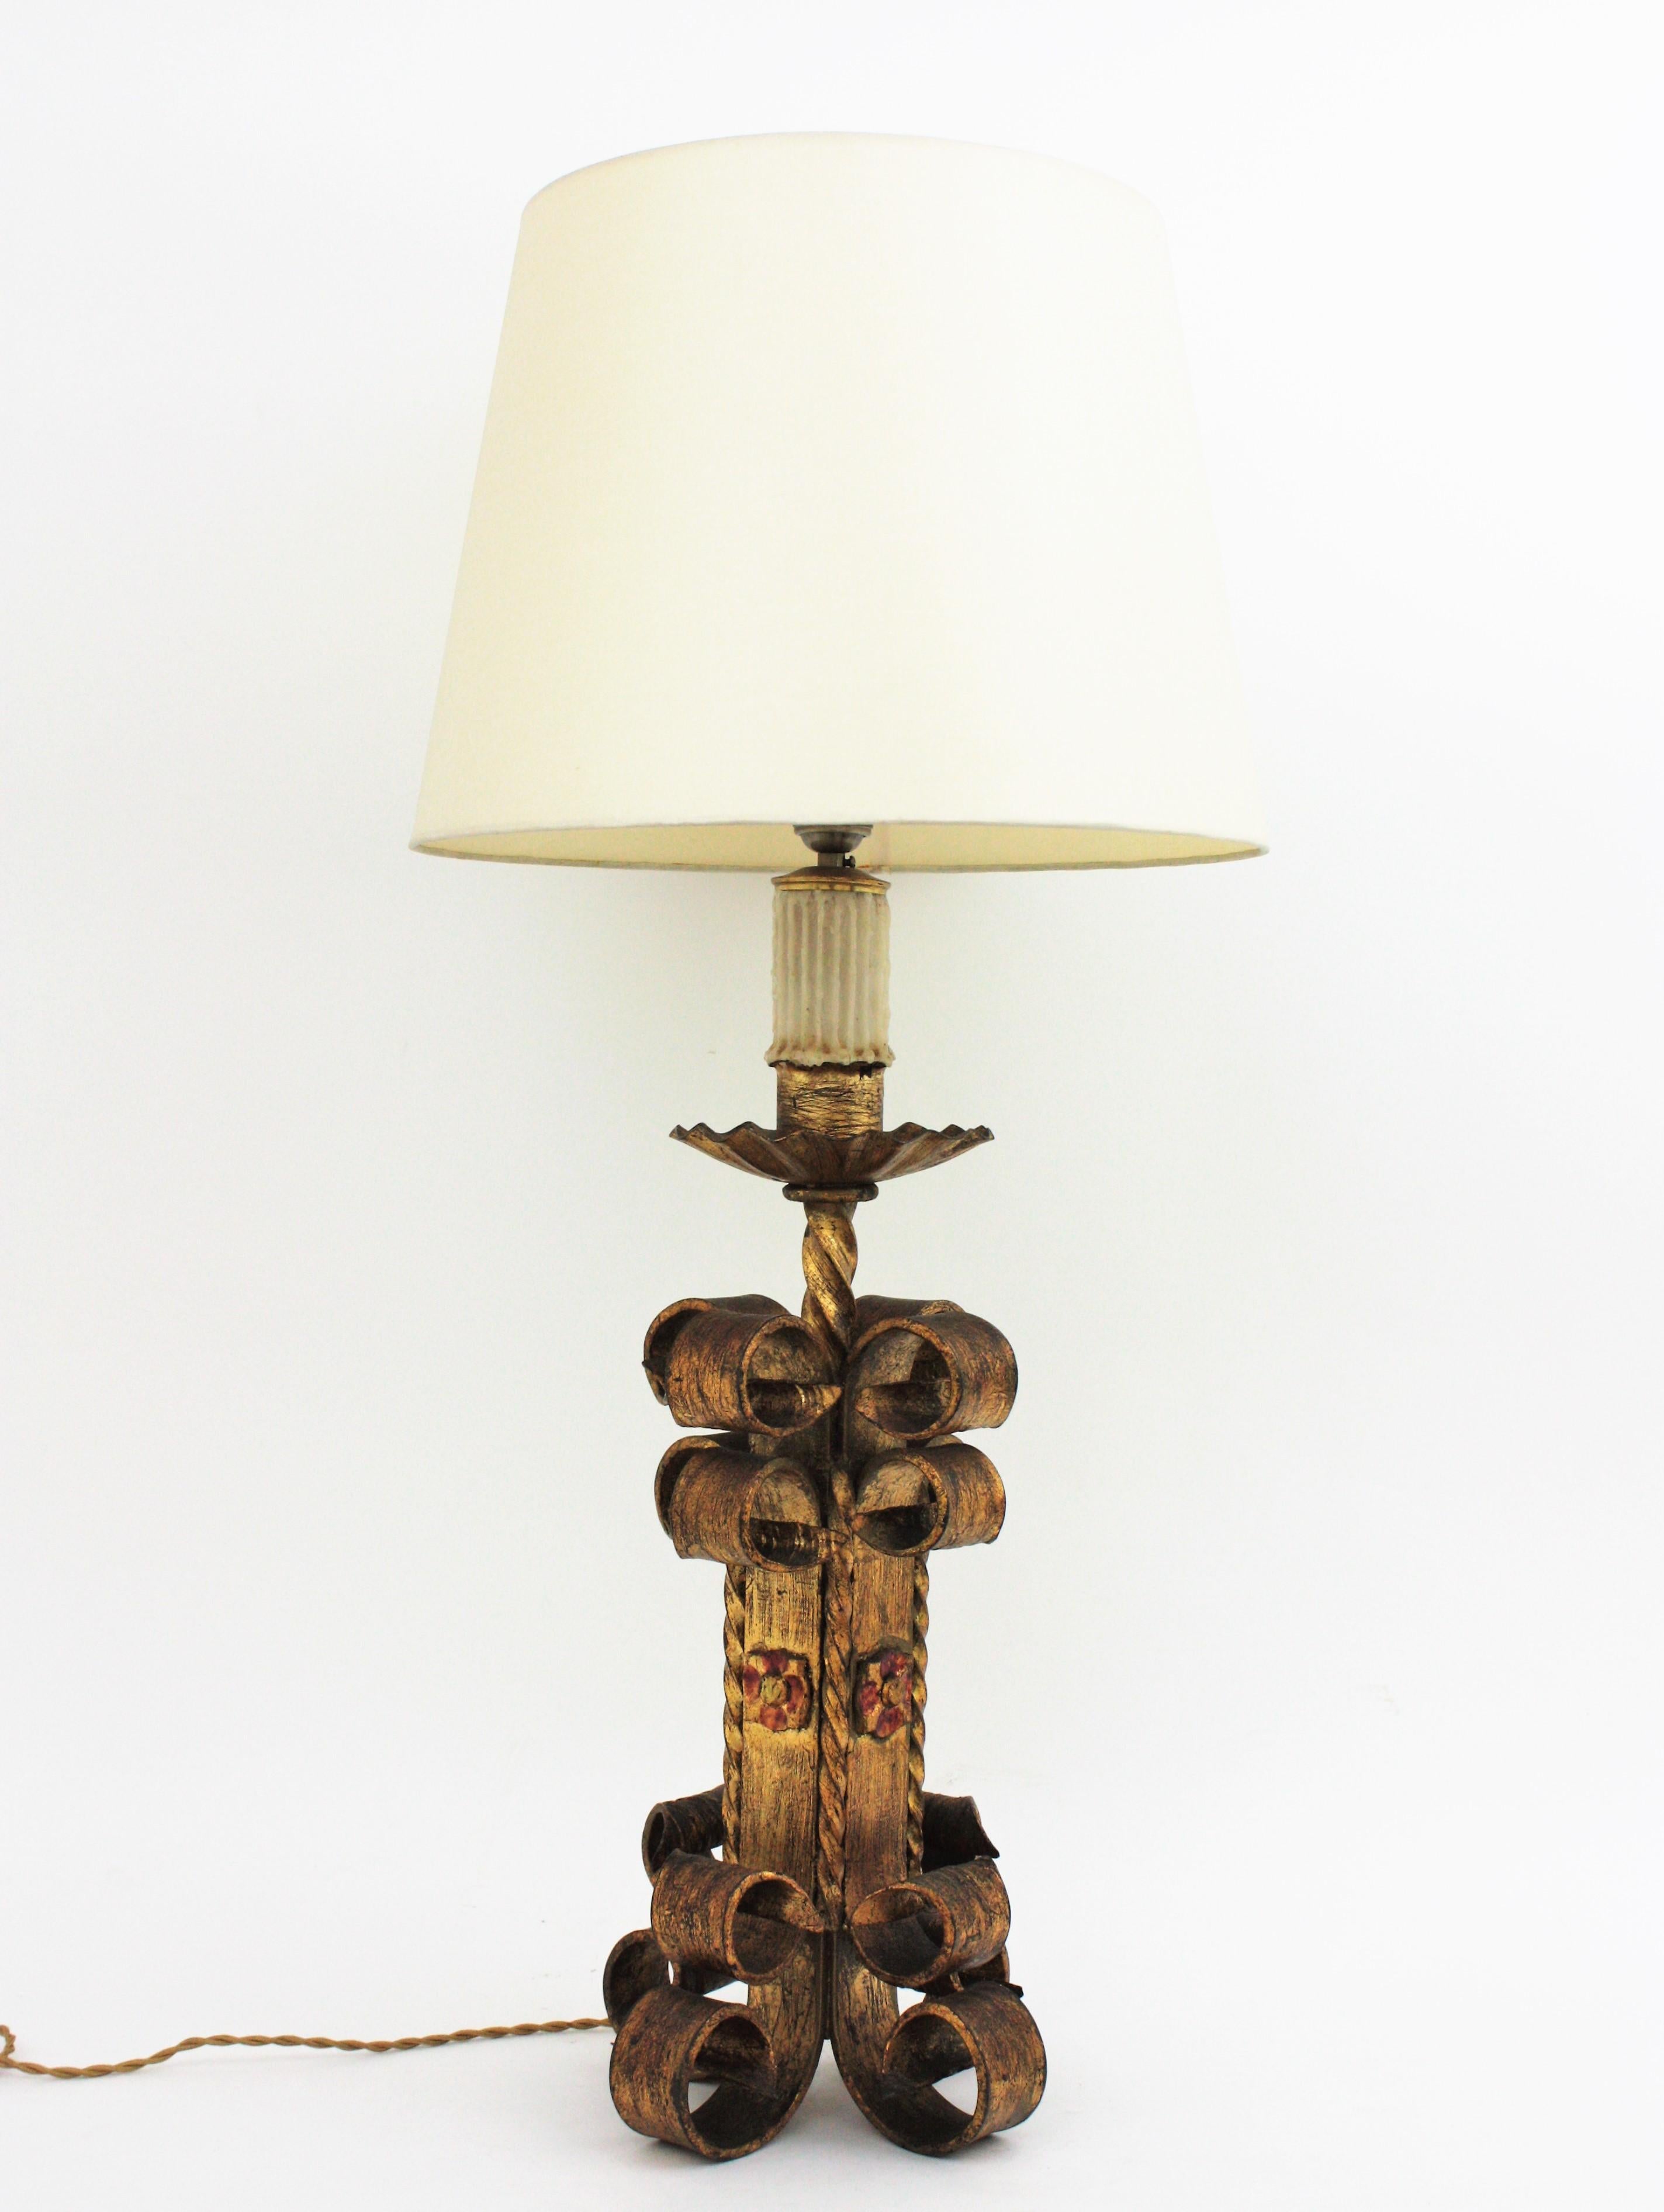 Spanish Revival Scrollwork Table Lamp in Gilt Wrought Iron, 1940s In Good Condition For Sale In Barcelona, ES